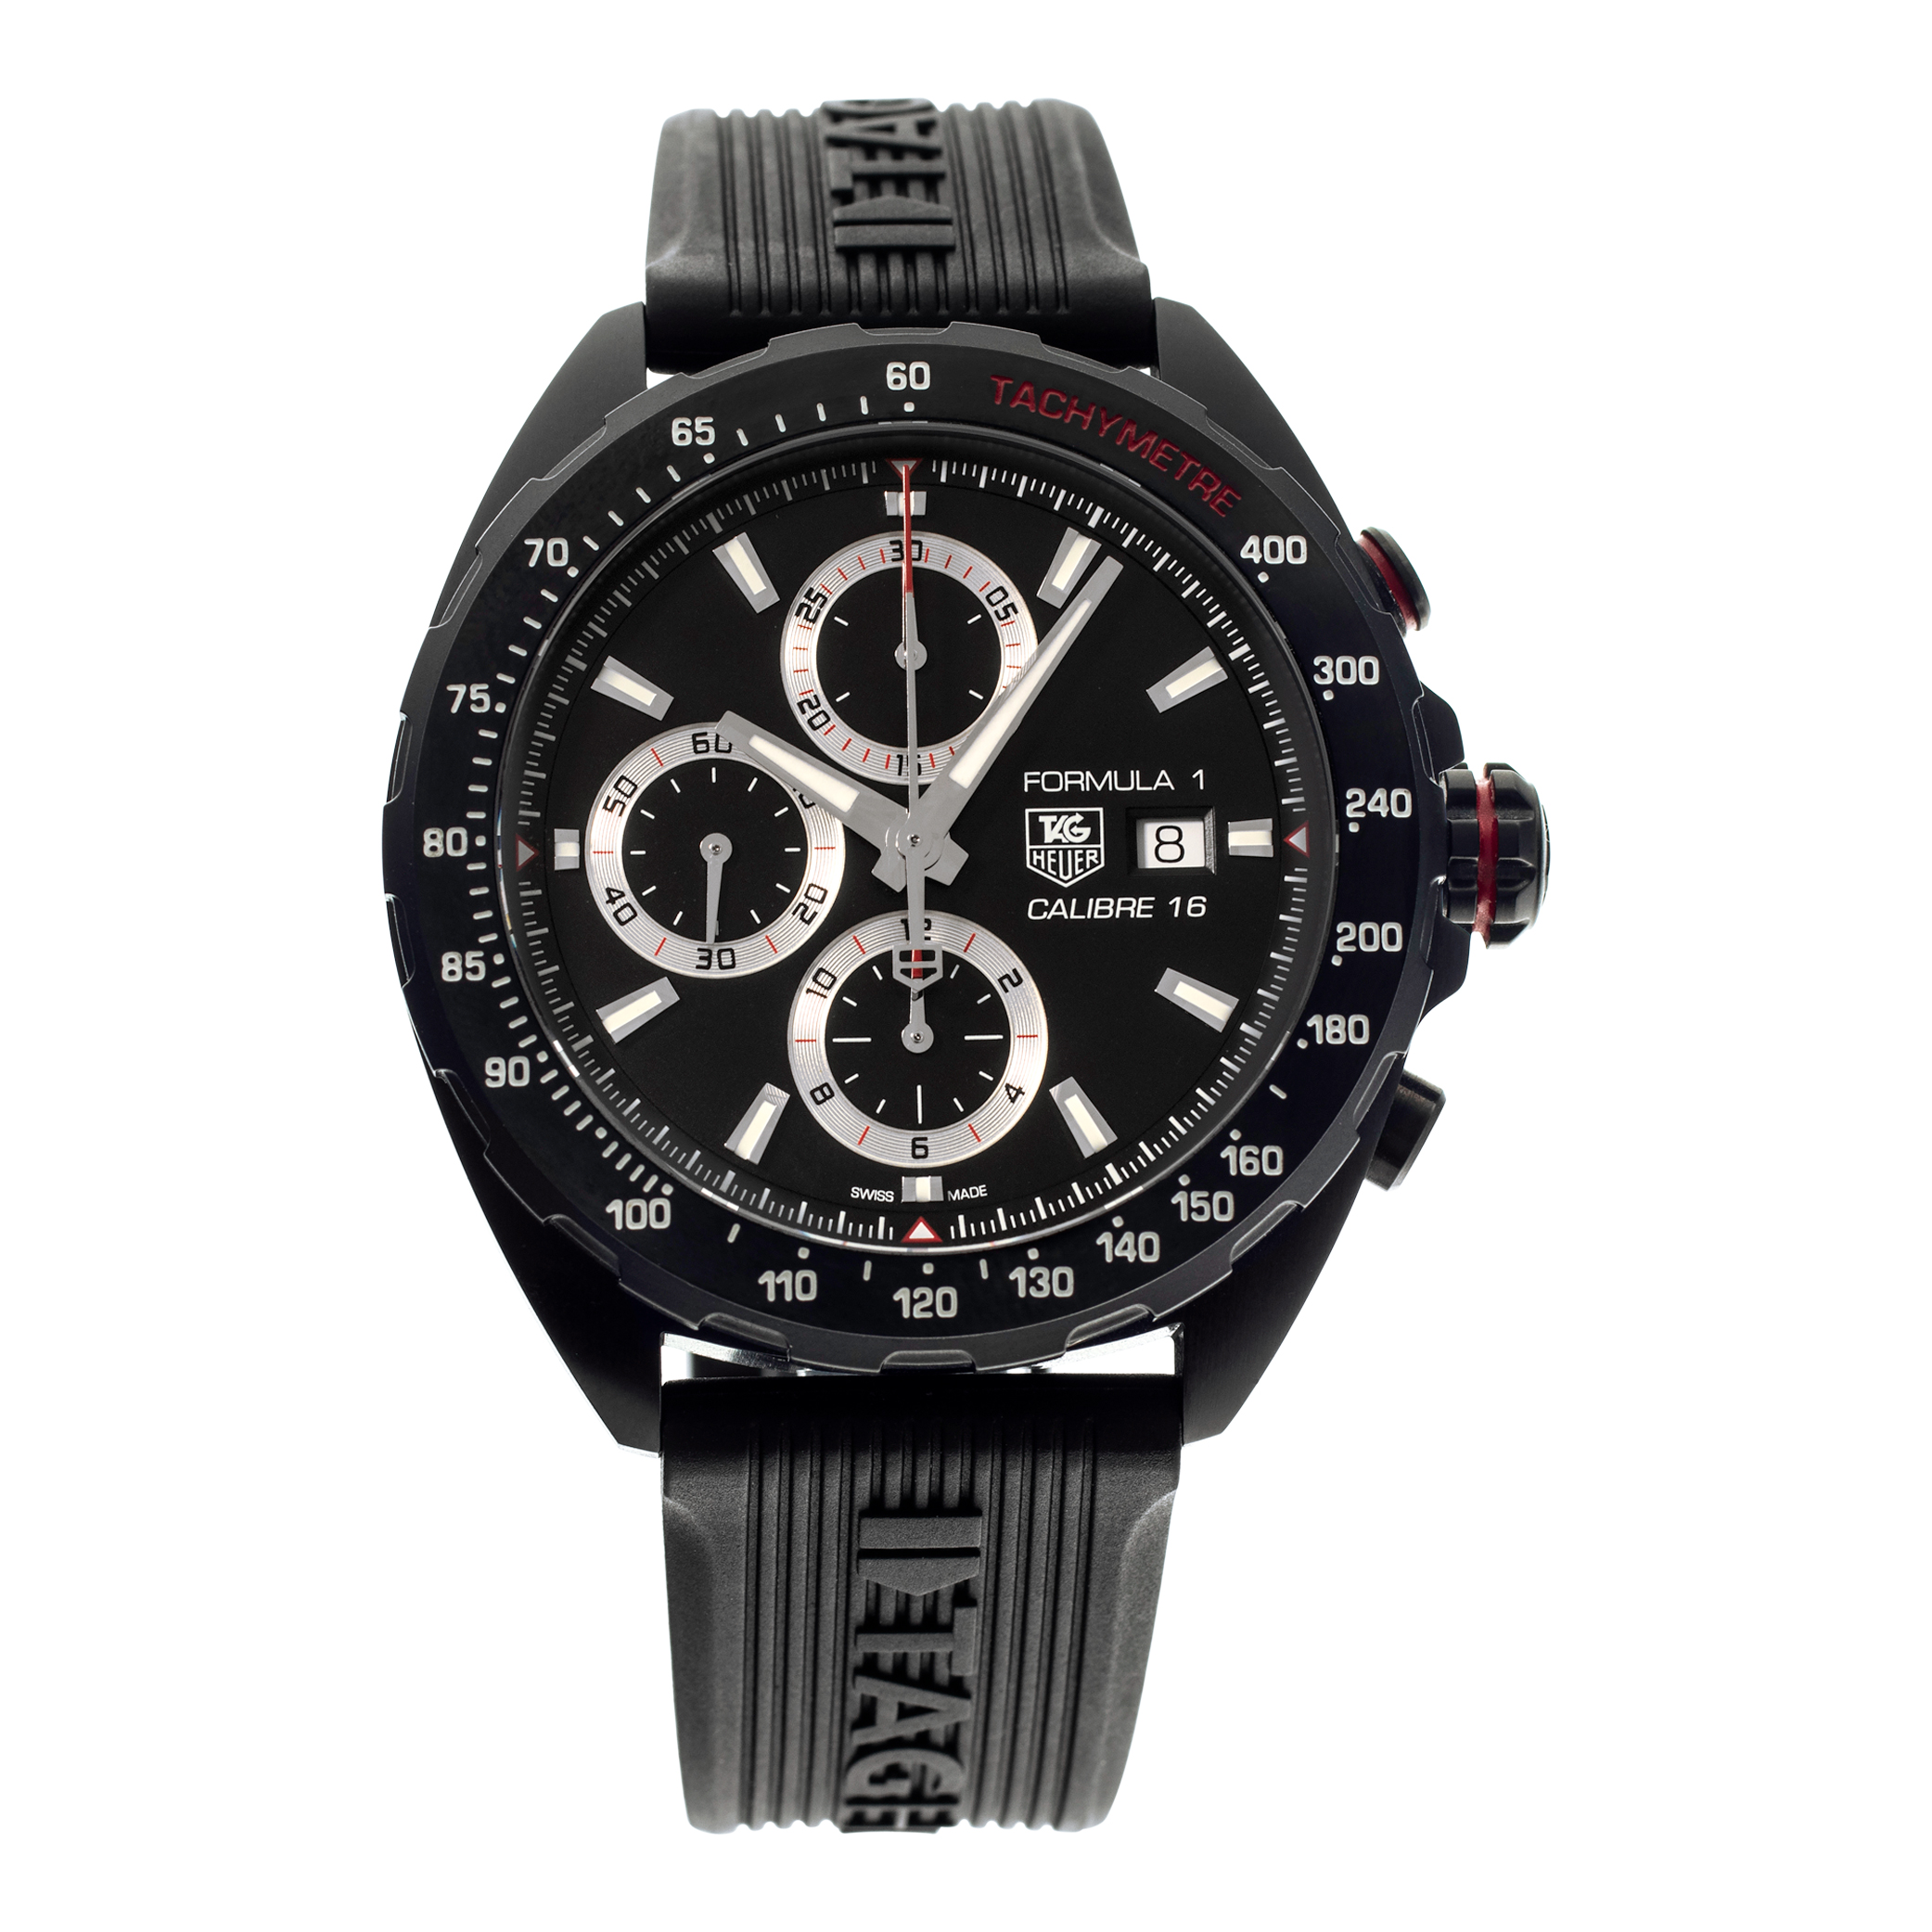 Tag Heuer Formula 1 44mm caz2011-0 (Watches)